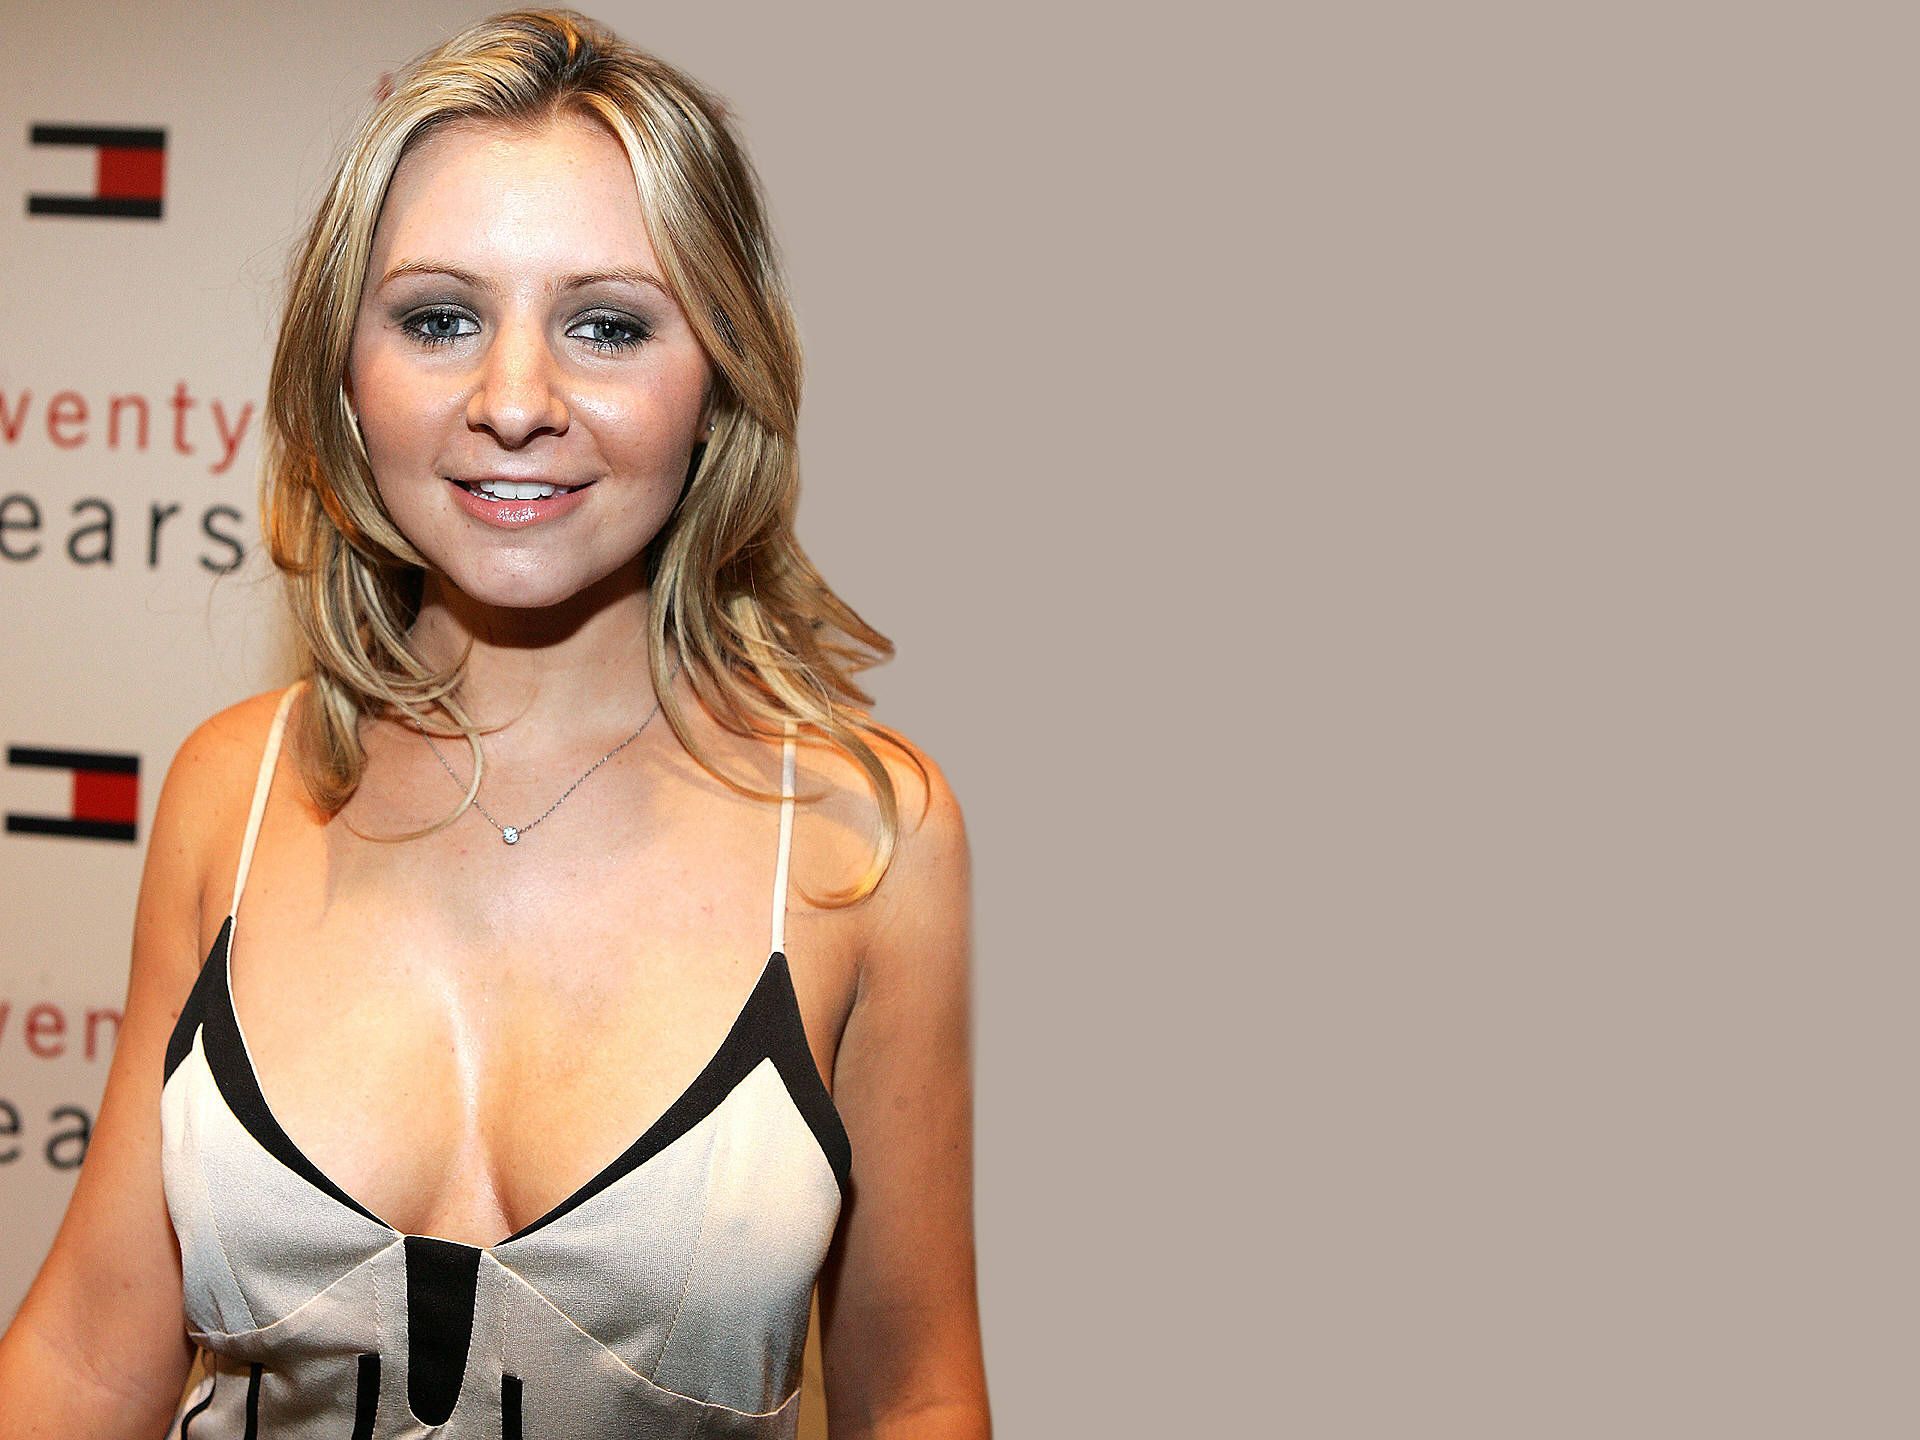 Pictures of Beverley Mitchell.